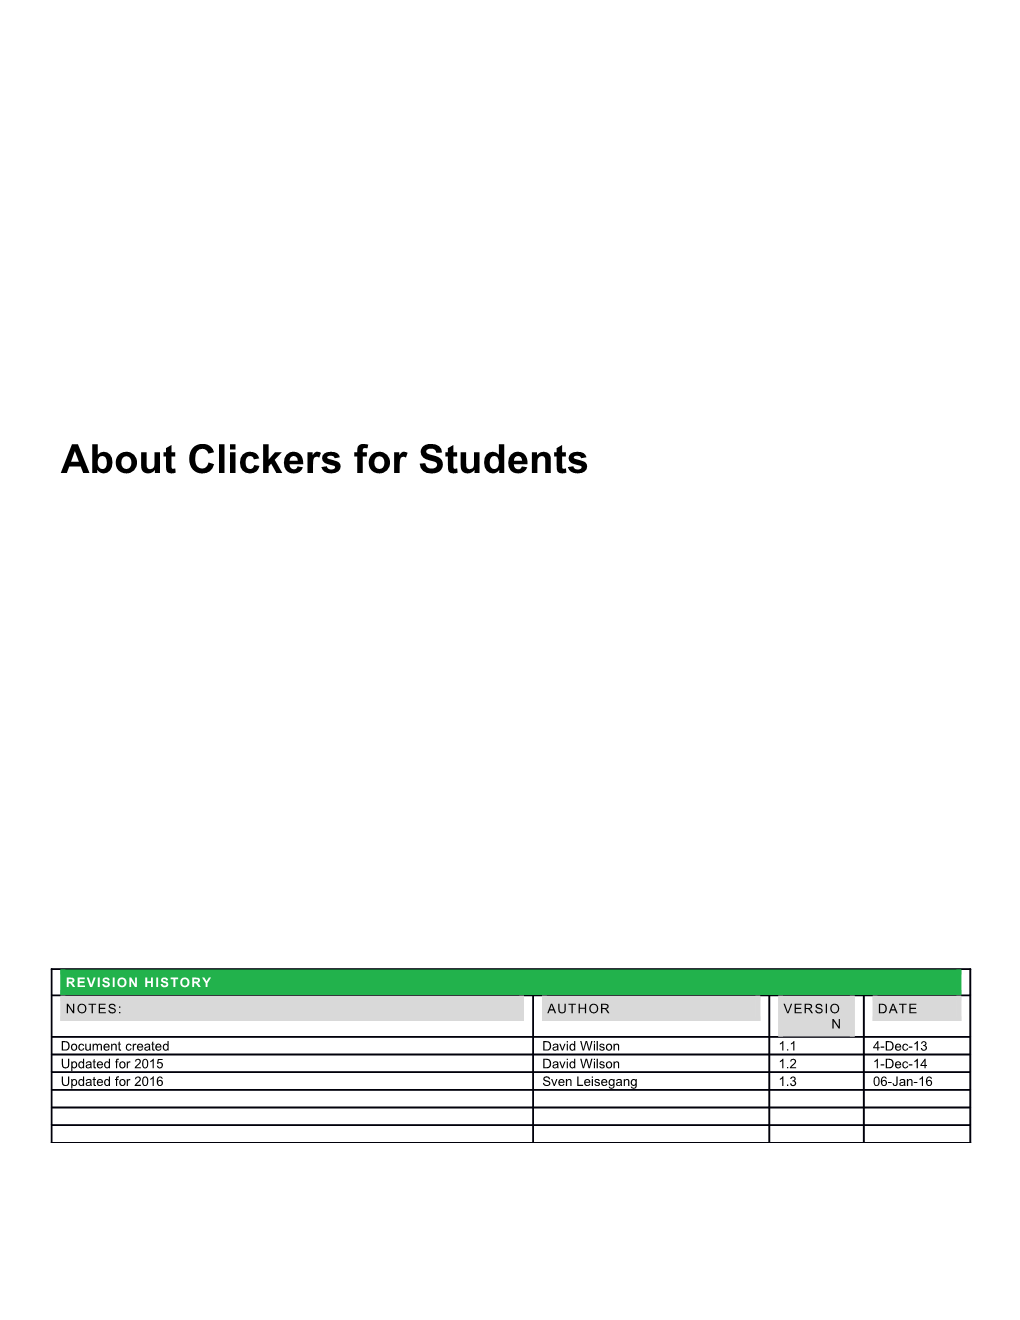 About Clickers for Students